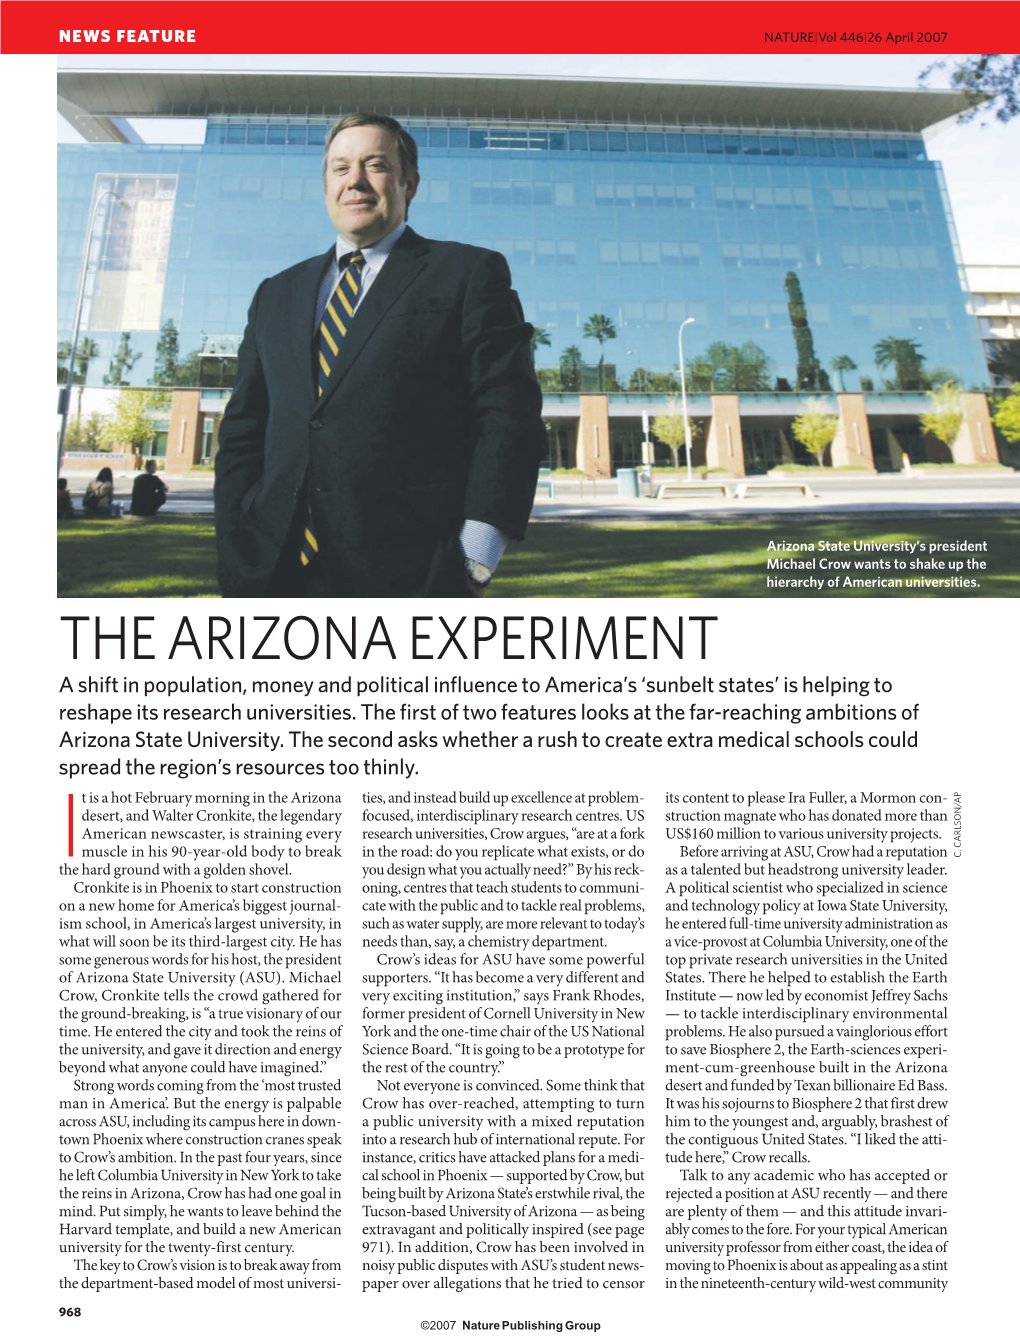 THE ARIZONA EXPERIMENT a Shift in Population, Money and Political Influence to America’S ‘Sunbelt States’ Is Helping to Reshape Its Research Universities